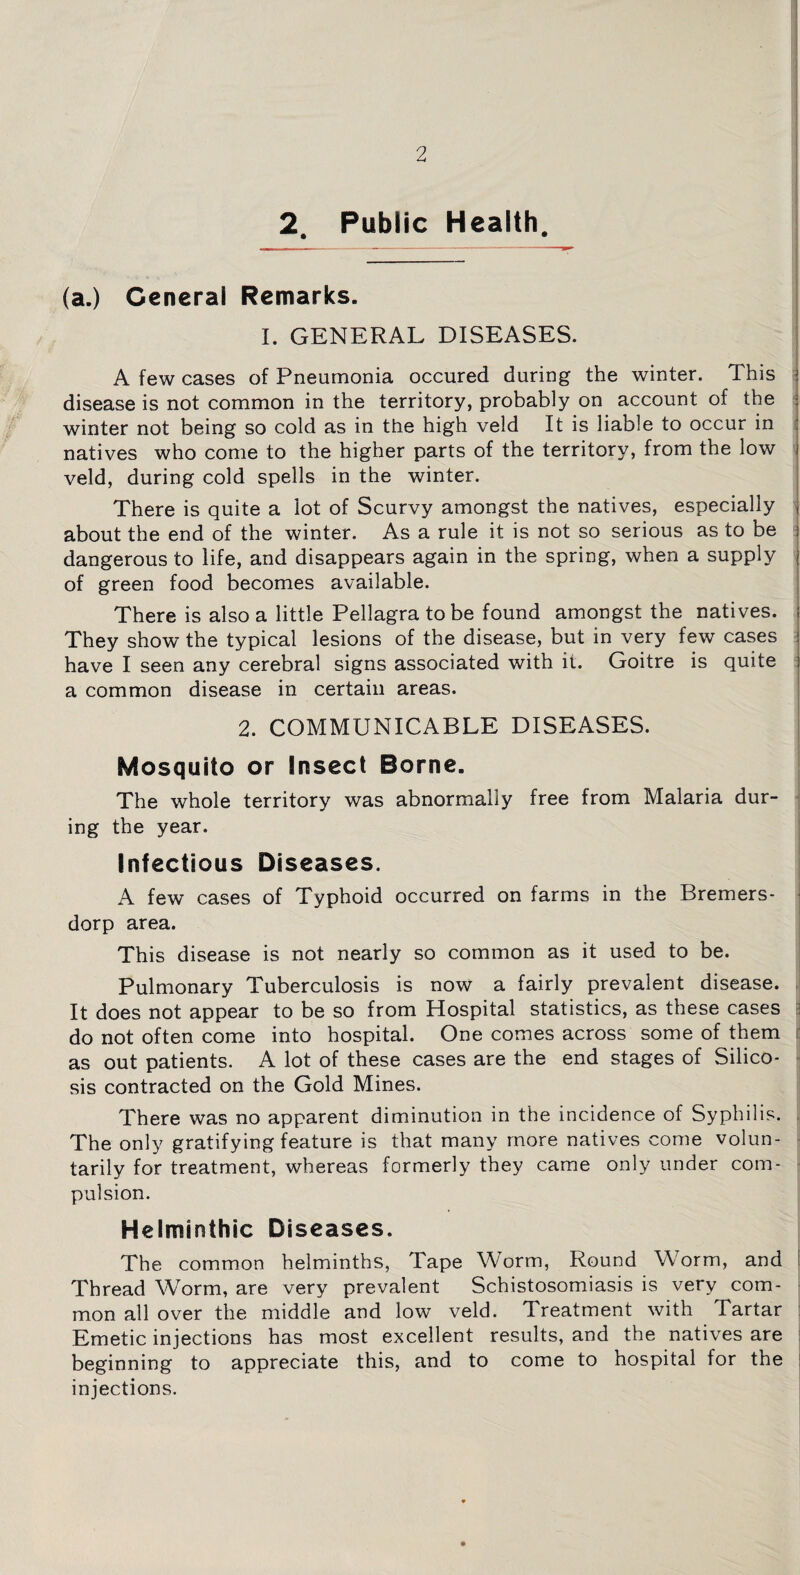 2 Public Health. (a.) General Remarks. I. GENERAL DISEASES. A few cases of Pneumonia occured during the winter. This disease is not common in the territory, probably on account of the winter not being so cold as in the high veld It is liable to occur in natives who come to the higher parts of the territory, from the low veld, during cold spells in the winter. There is quite a lot of Scurvy amongst the natives, especially about the end of the winter. As a rule it is not so serious as to be dangerous to life, and disappears again in the spring, when a supply of green food becomes available. There is also a little Pellagra to be found amongst the natives. They show the typical lesions of the disease, but in very few cases have I seen any cerebral signs associated with it. Goitre is quite a common disease in certain areas. 2. COMMUNICABLE DISEASES. Mosquito or Insect Borne. The whole territory was abnormally free from Malaria dur¬ ing the year. Infectious Diseases. A few cases of Typhoid occurred on farms in the Bremers- dorp area. This disease is not nearly so common as it used to be. Pulmonary Tuberculosis is now a fairly prevalent disease. It does not appear to be so from Hospital statistics, as these cases do not often come into hospital. One comes across some of them as out patients. A lot of these cases are the end stages of Silico¬ sis contracted on the Gold Mines. There was no apparent diminution in the incidence of Syphilis. The only gratifying feature is that many more natives come volun¬ tarily for treatment, whereas formerly they came only under com¬ pulsion. Helminthic Diseases. The common helminths, Tape Worm, Round Worm, and Thread Worm, are very prevalent Schistosomiasis is very com¬ mon all over the middle and low veld. Treatment with Tartar Emetic injections has most excellent results, and the natives are beginning to appreciate this, and to come to hospital for the injections.